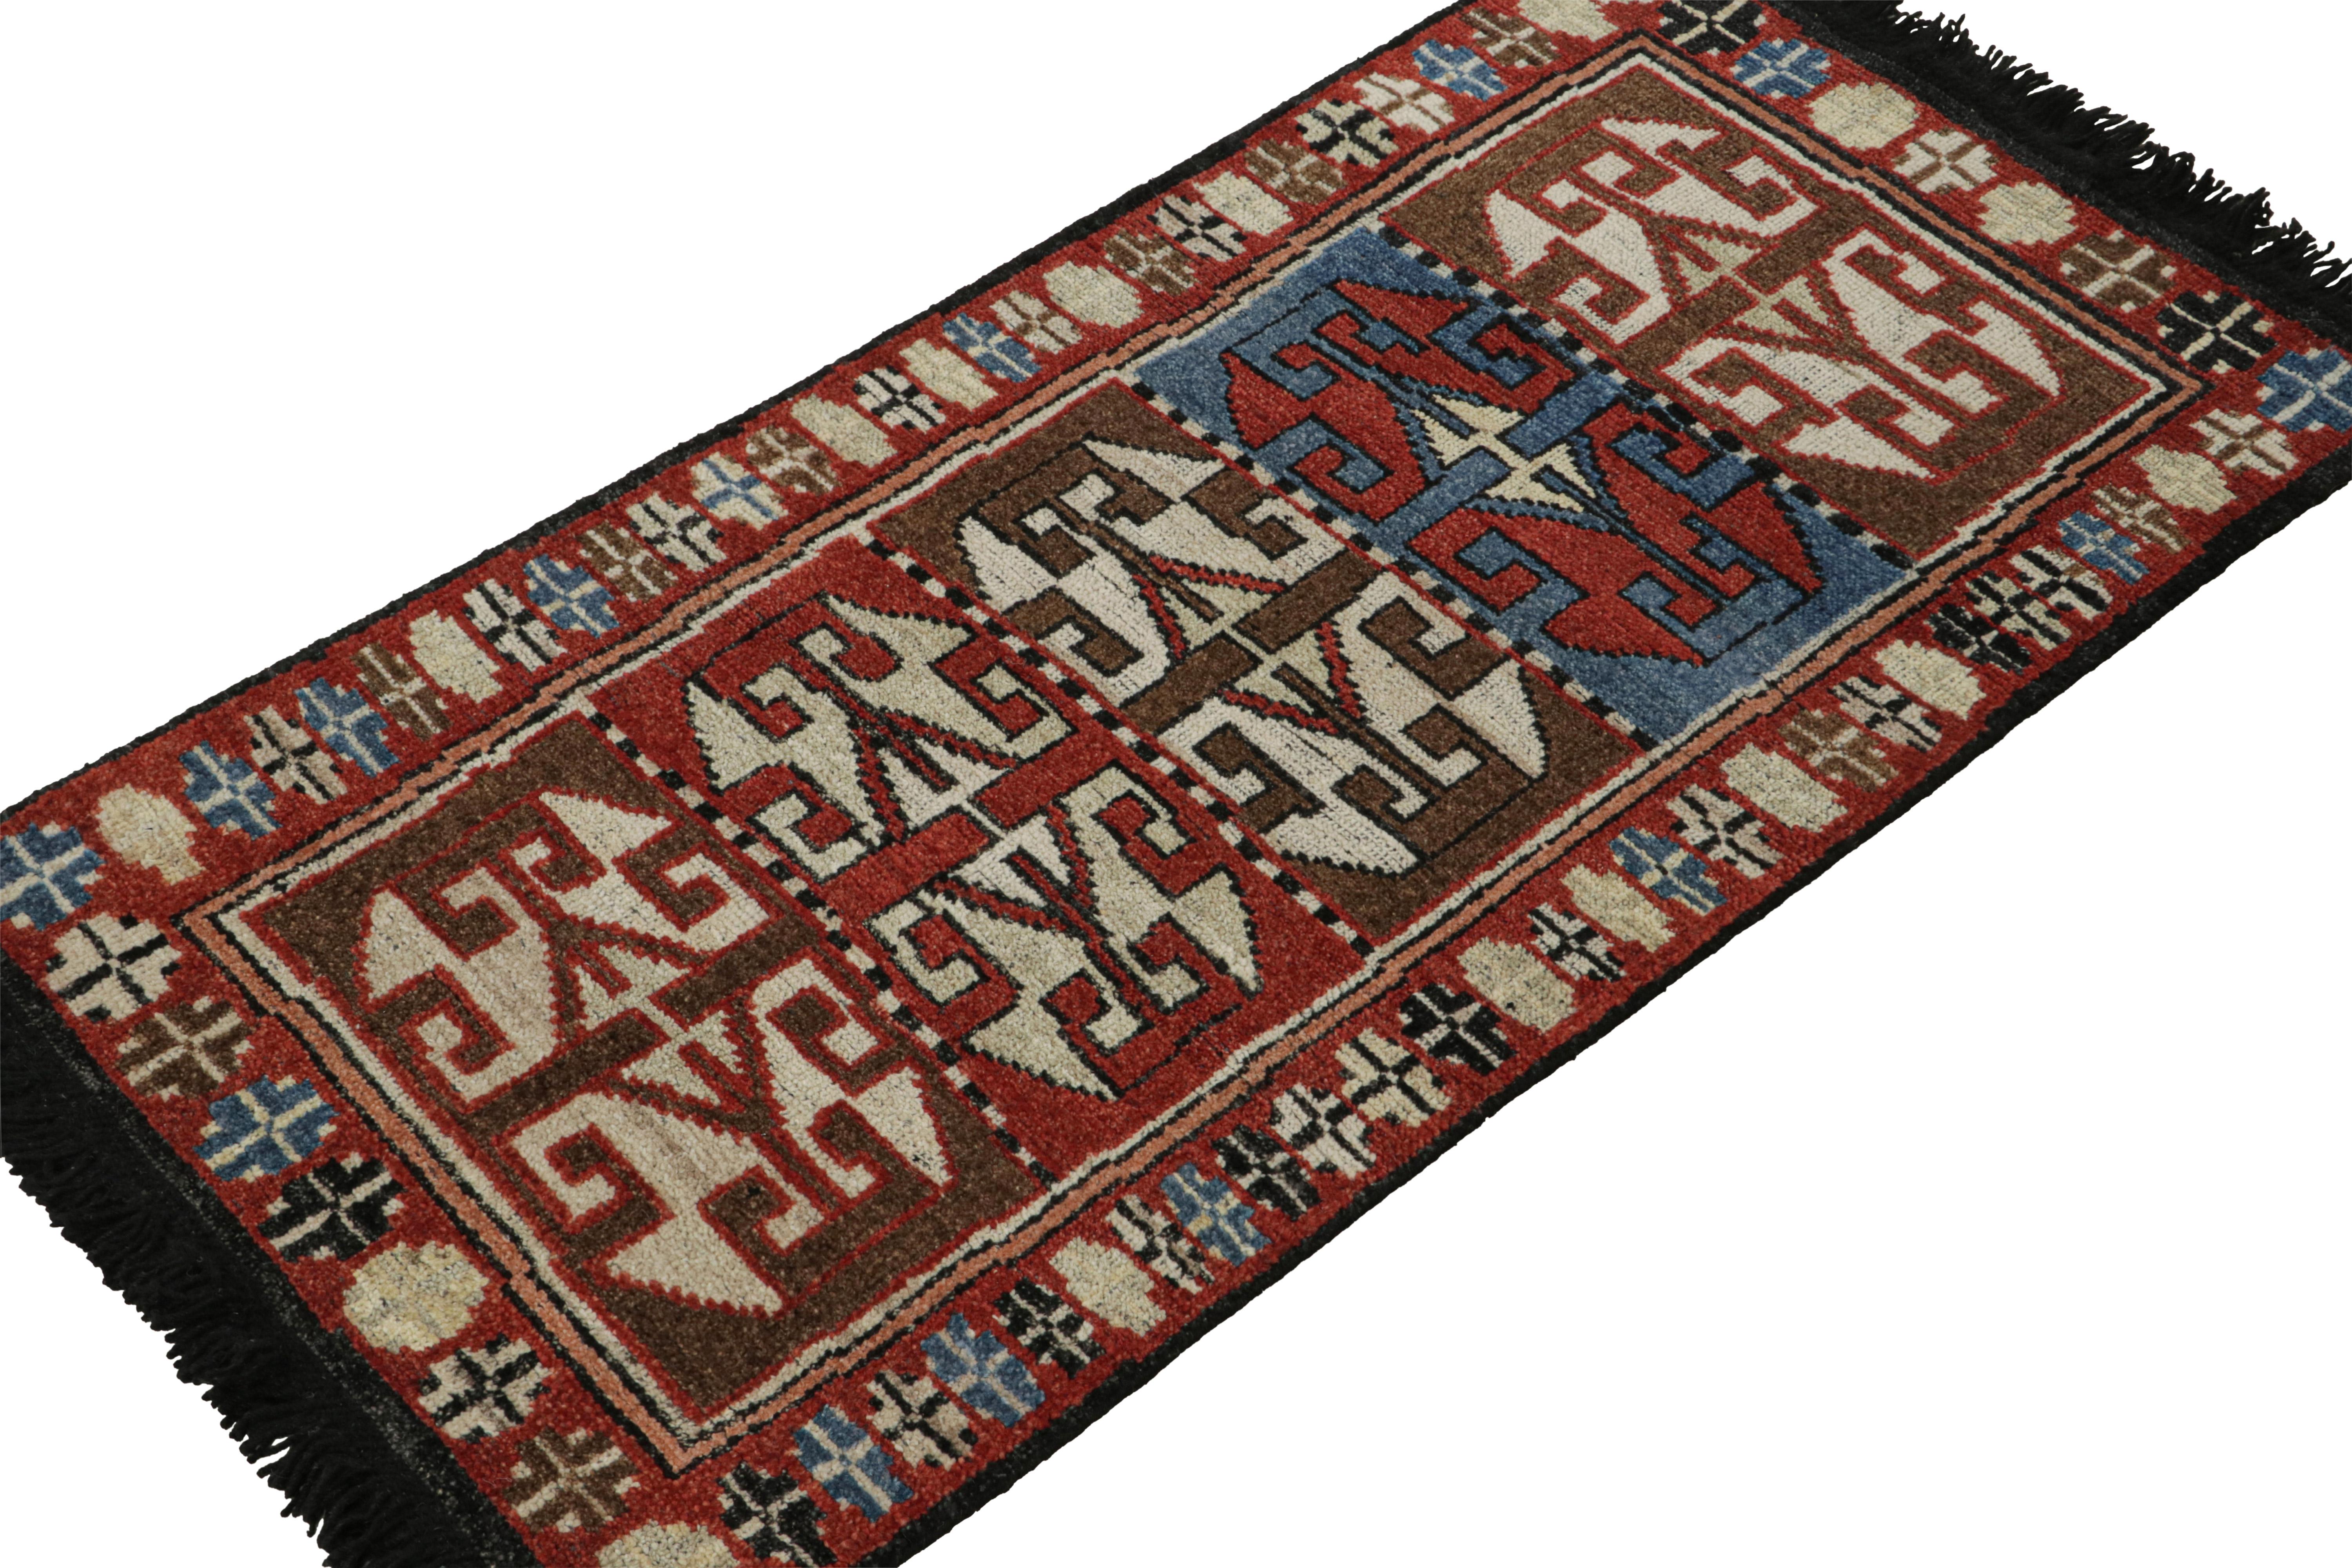 This 2x4 rug is a grand new entry to Rug & Kilim’s custom classics Burano collection. Hand-knotted in wool.

On the design

This rug features geometric patterns from primitivist, nomadic motifs in rich tones of red, blue & brown. Inspired by